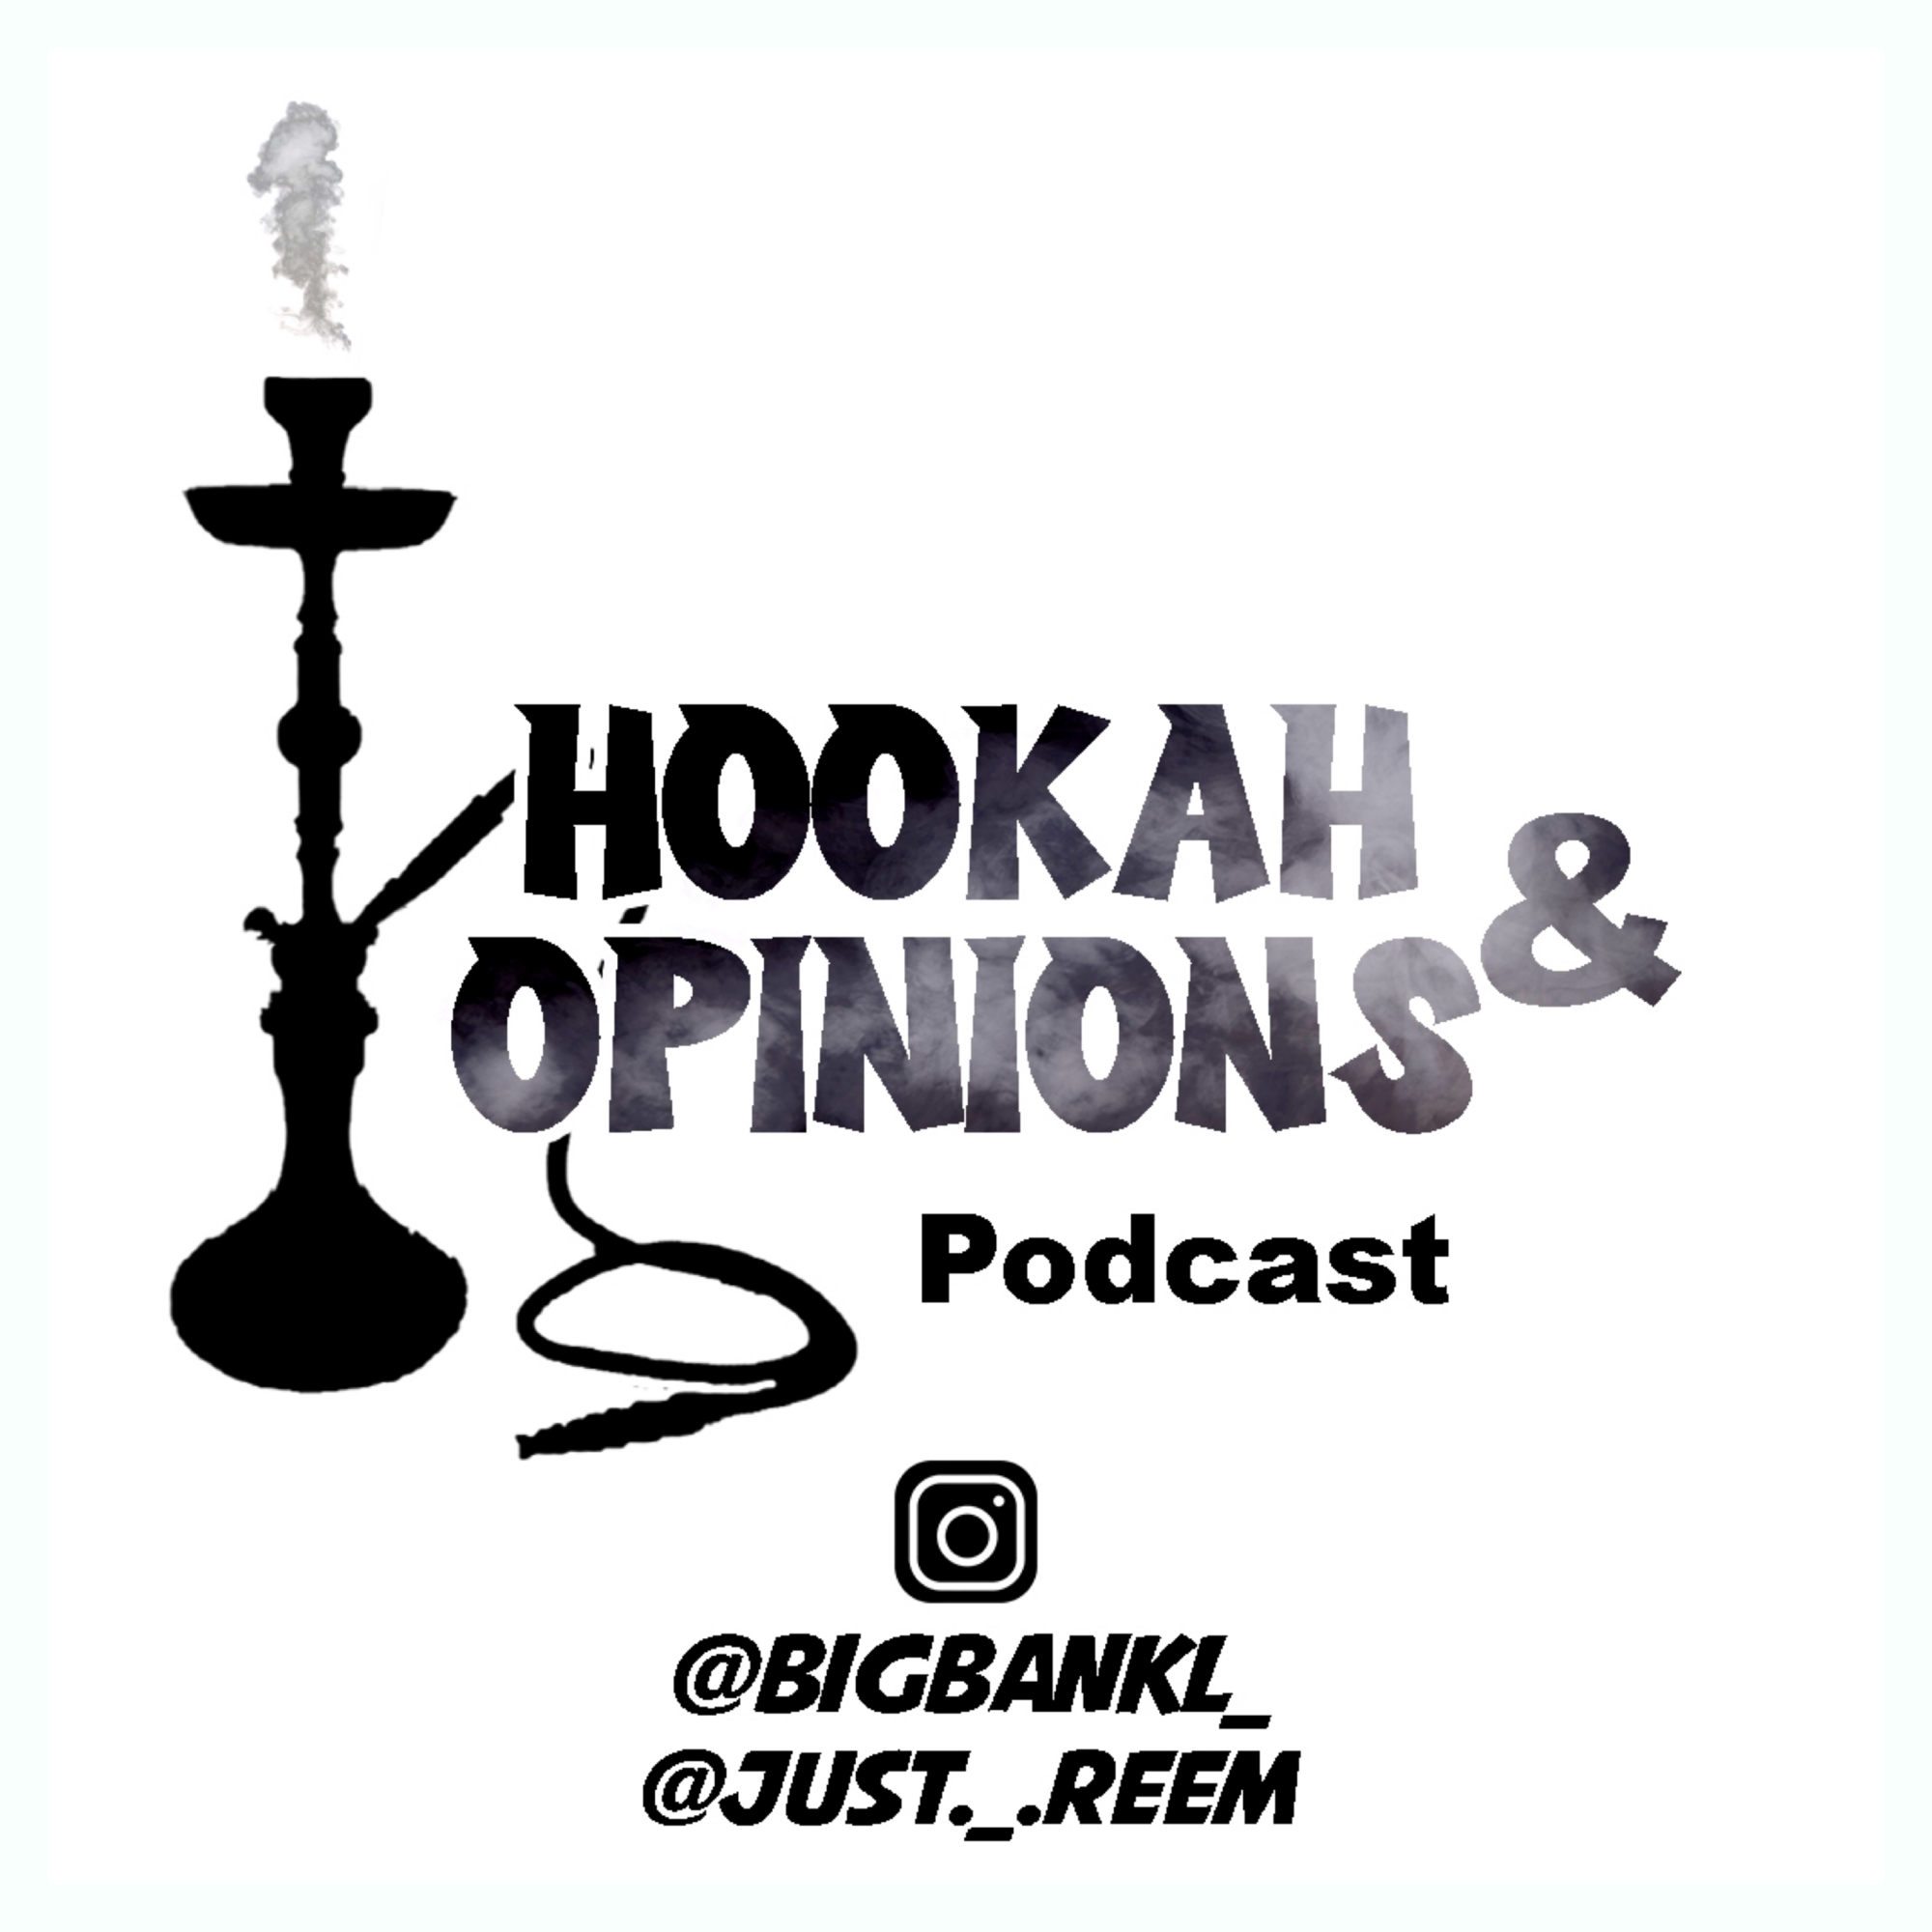 The Hookah & Opinions Podcast